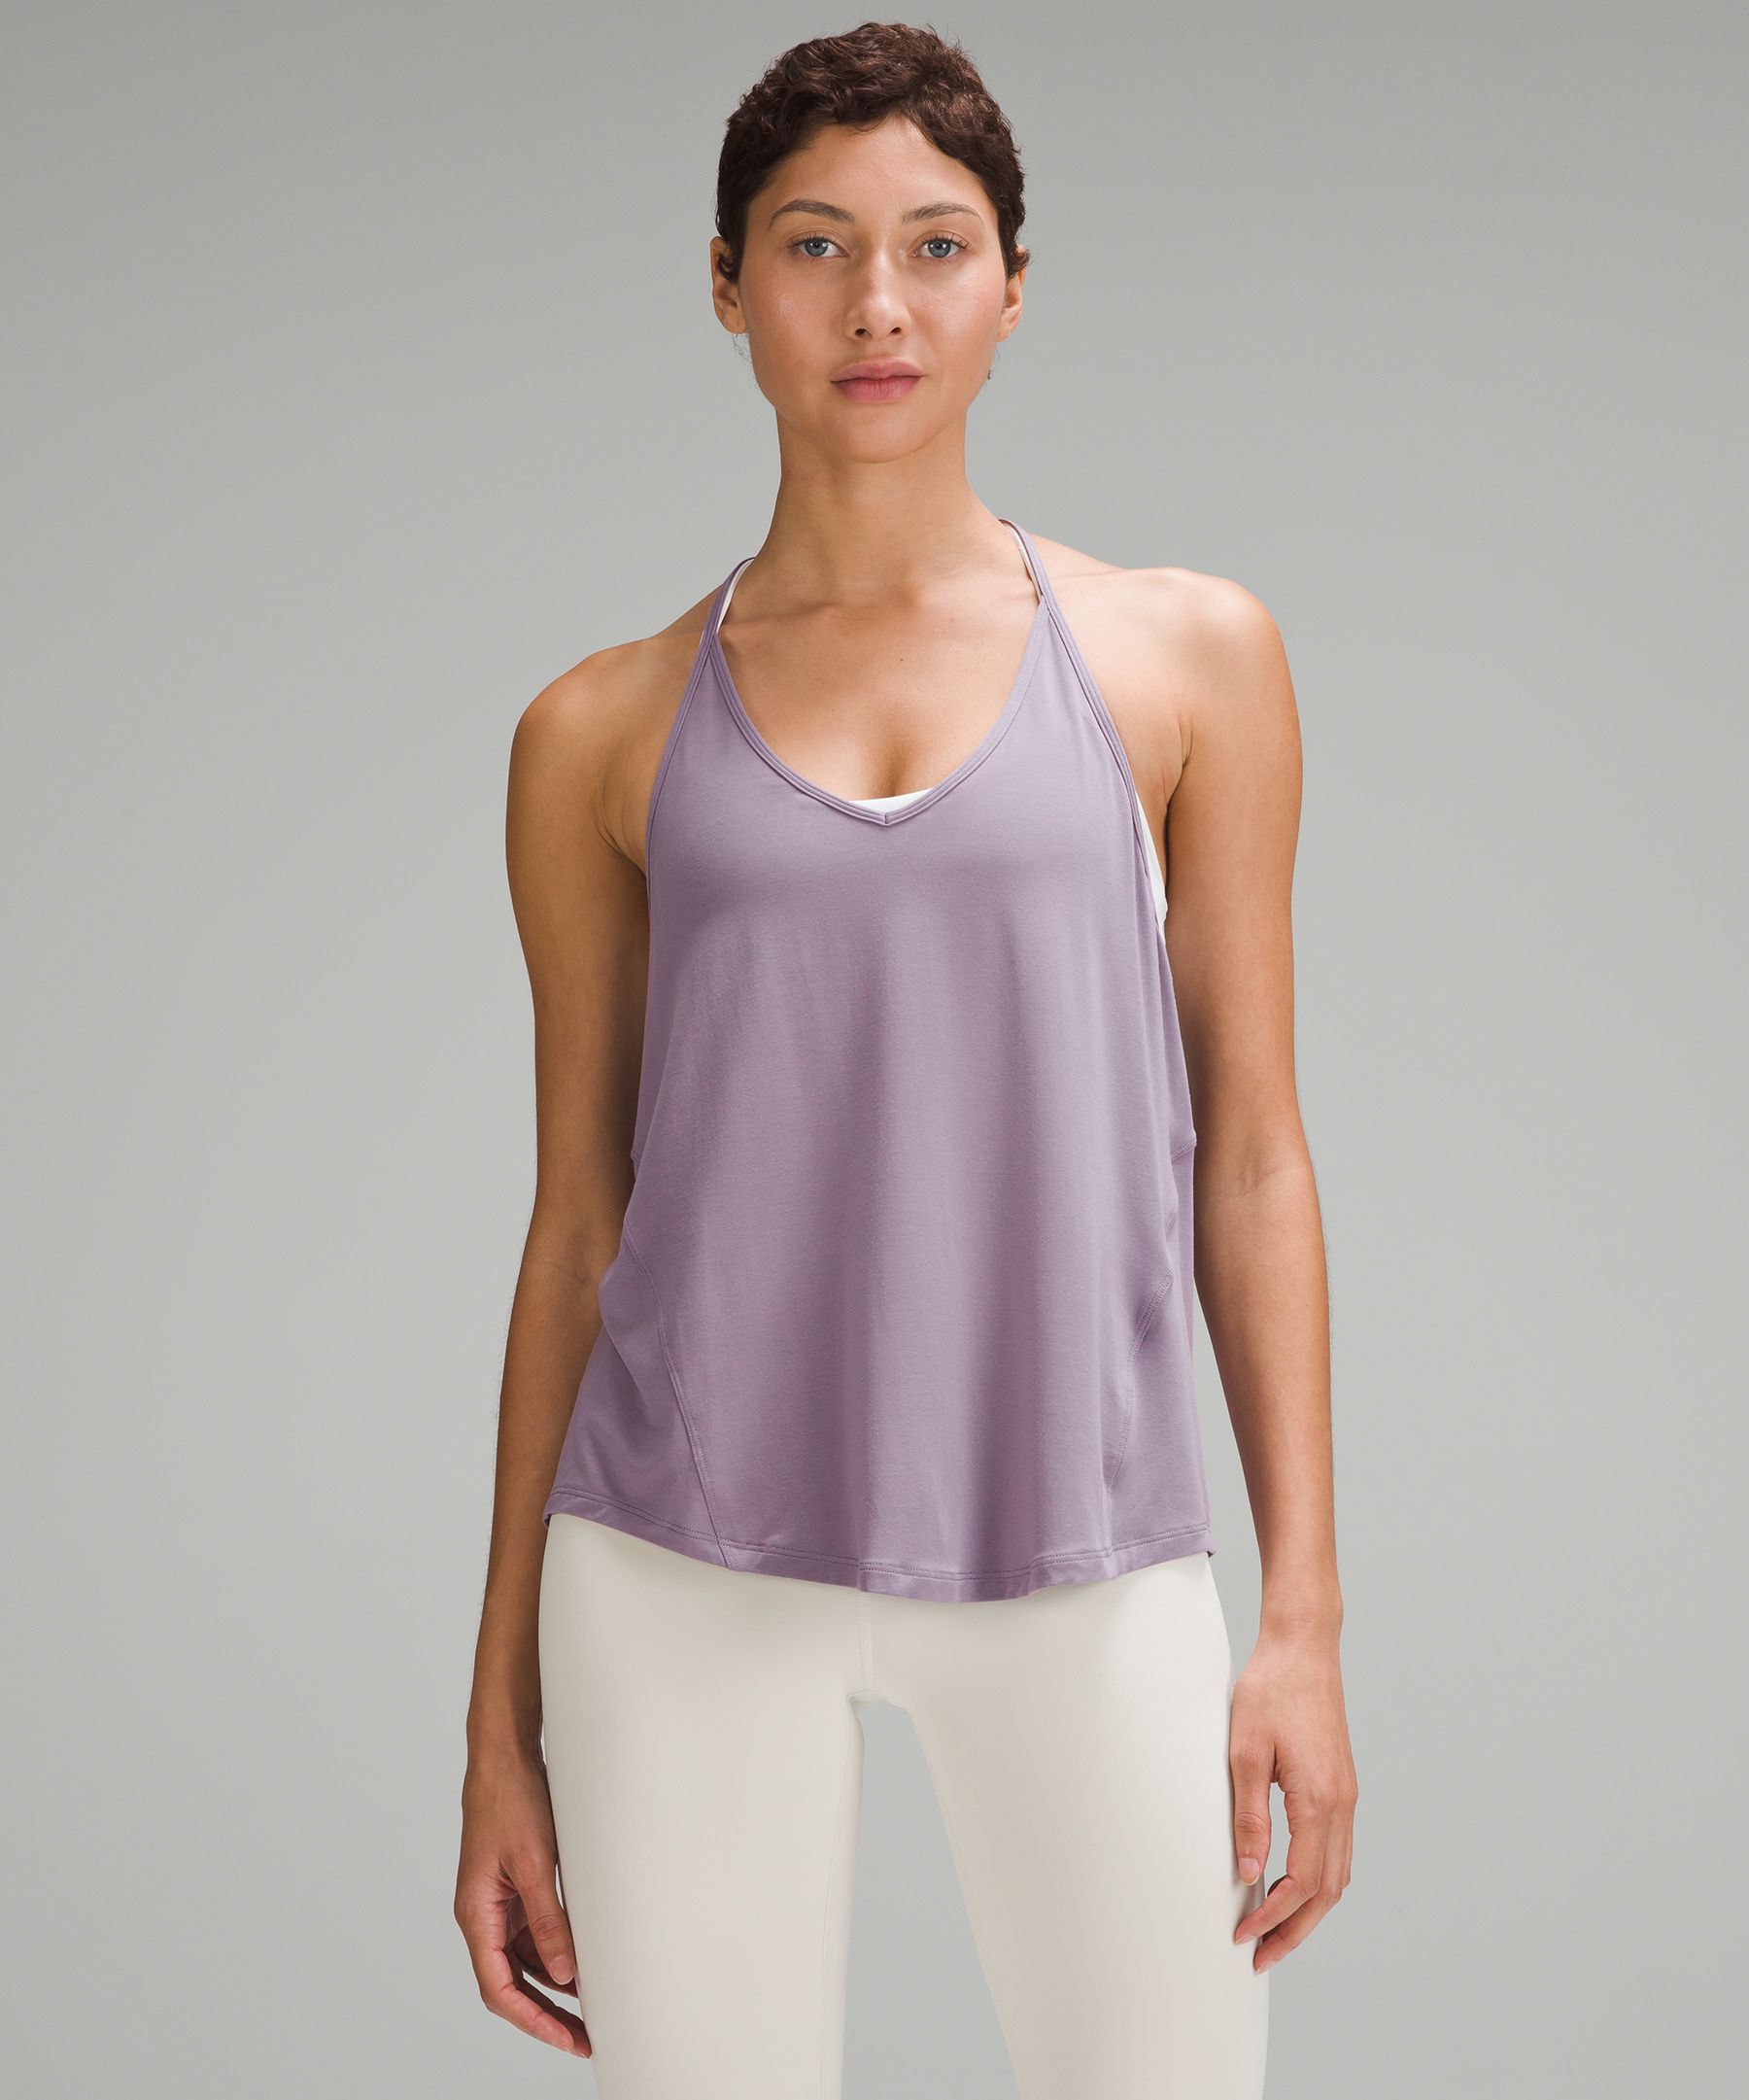 Lululemon tank top with built-in bra in size 8.  Lululemon tank top,  Purple tank top, Tank tops